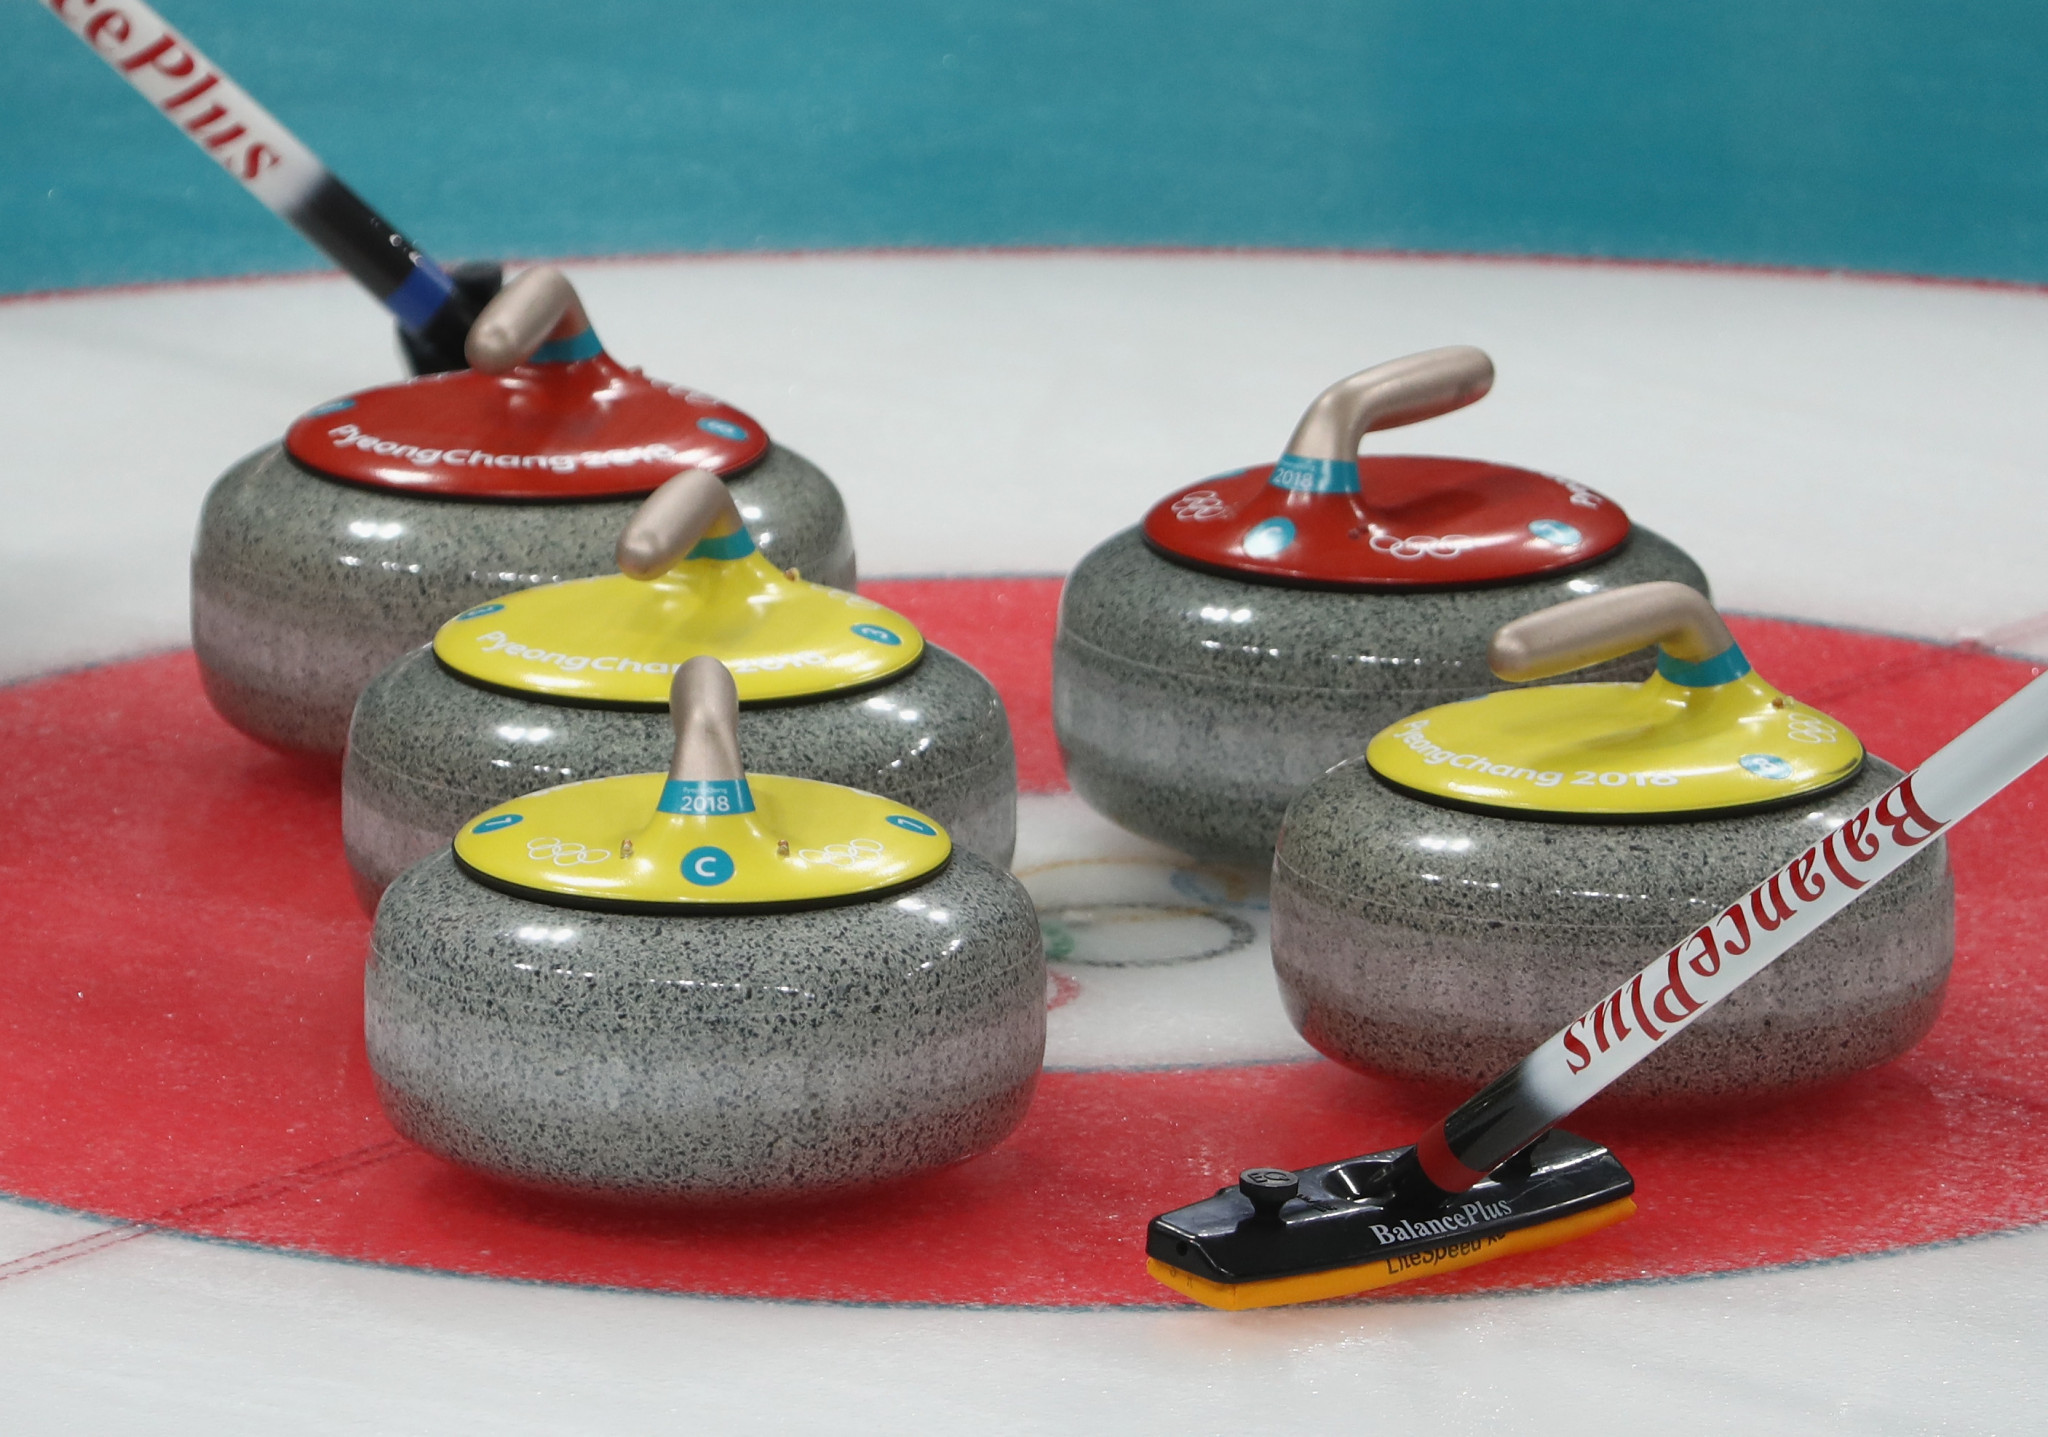 WCF name New Holland as presenting sponsor of World Men's Curling Championship